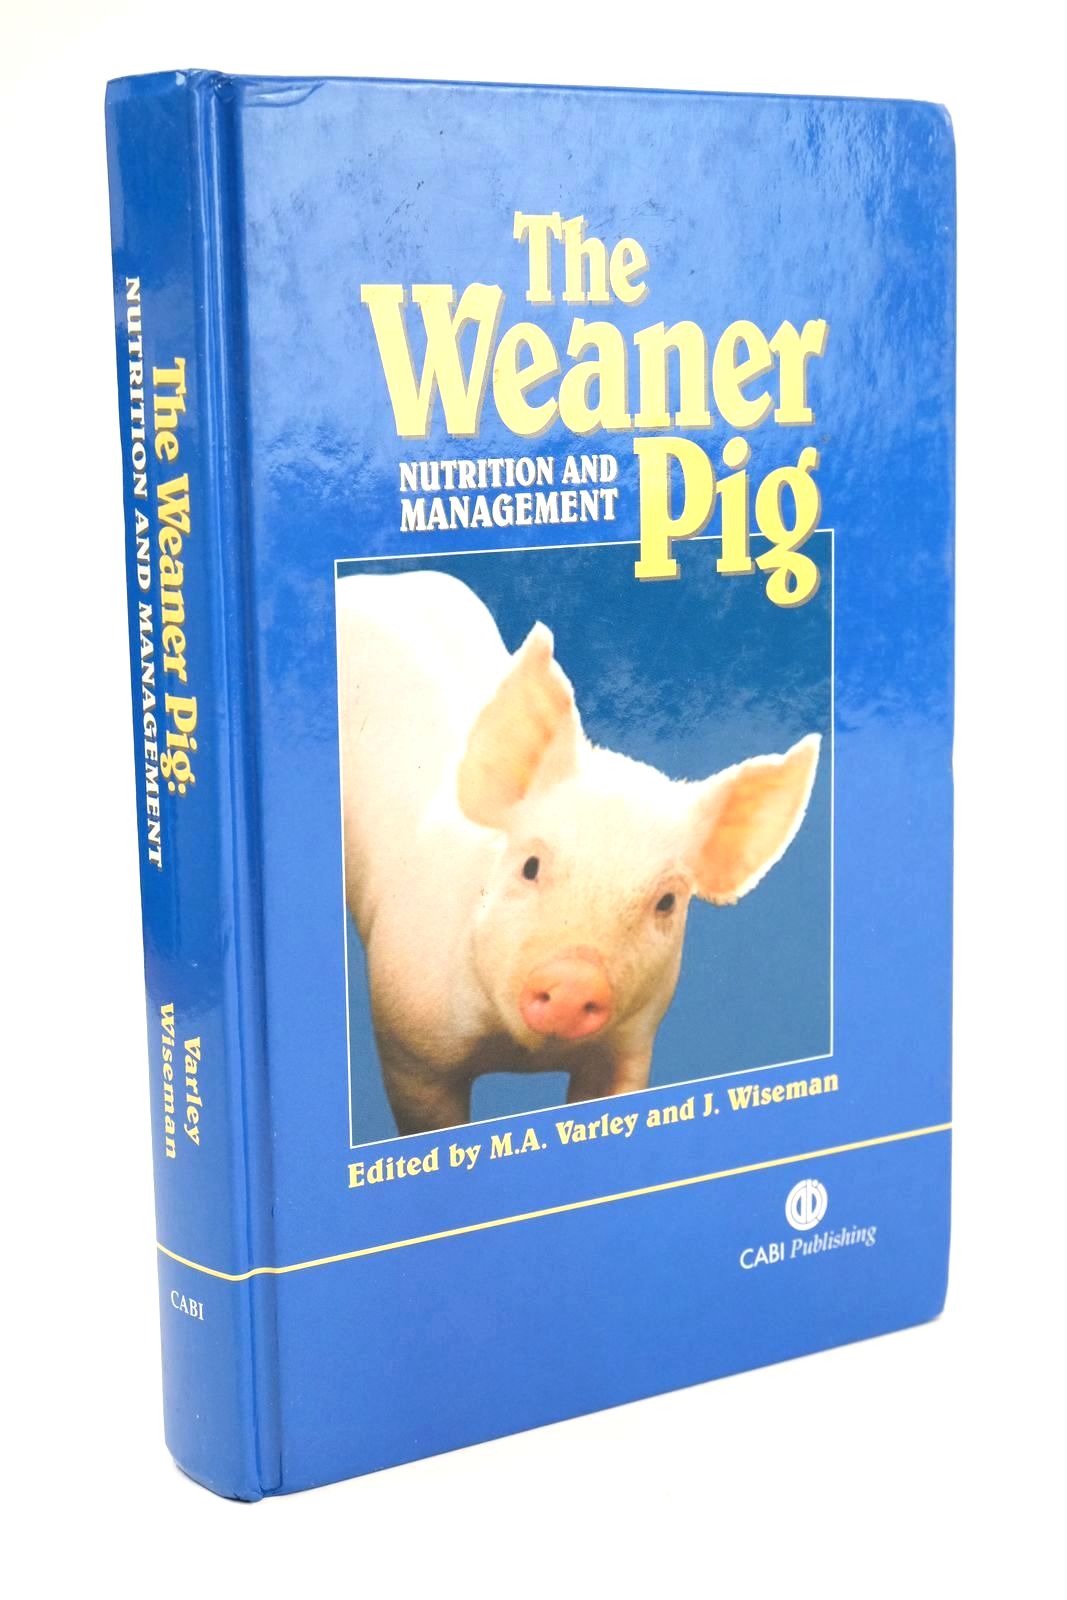 Photo of THE WEANER PIG NUTRITION AND MANAGEMENT written by Varley, M.A. Wiseman, J. published by Cabi Publishing (STOCK CODE: 1324889)  for sale by Stella & Rose's Books